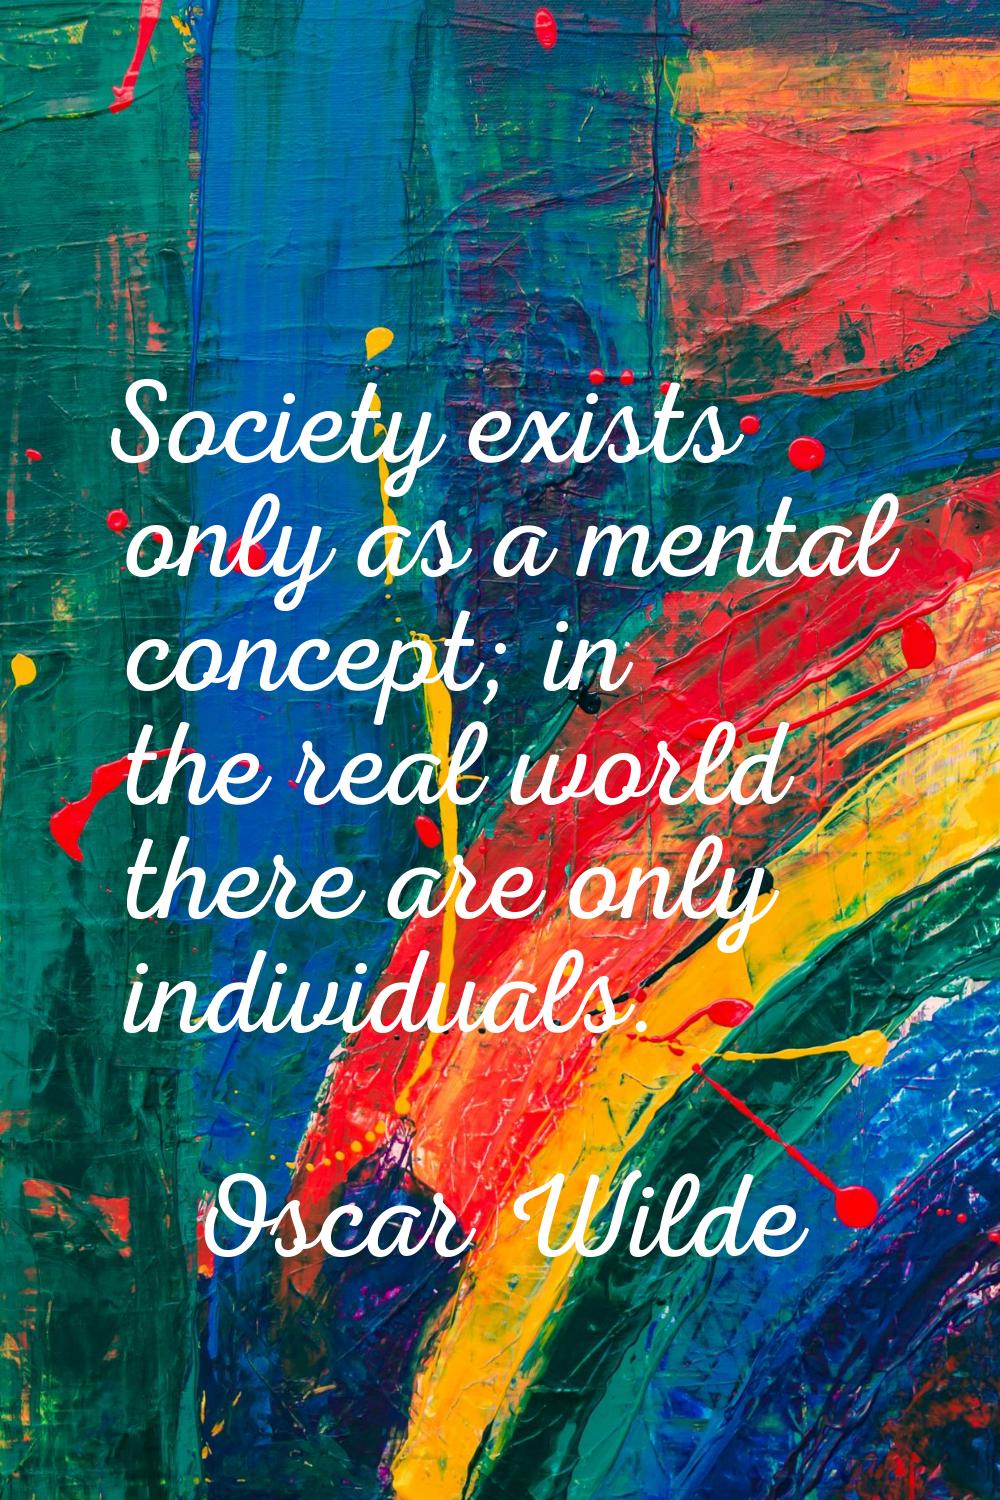 Society exists only as a mental concept; in the real world there are only individuals.